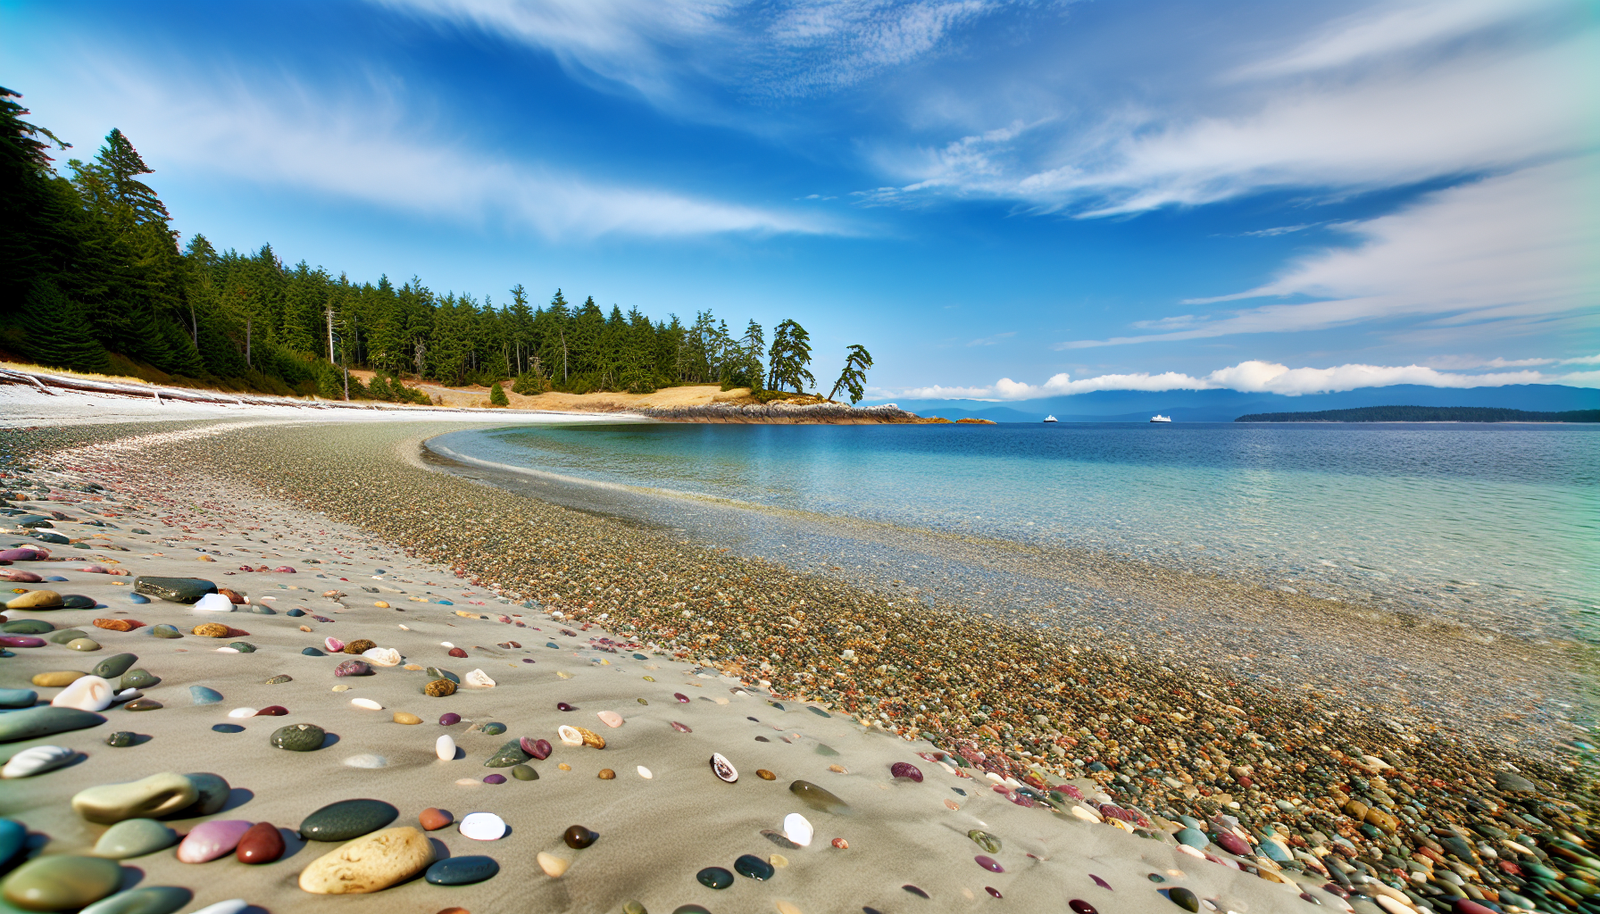 A tranquil beach on Saturna Island in the Southern Gulf Islands